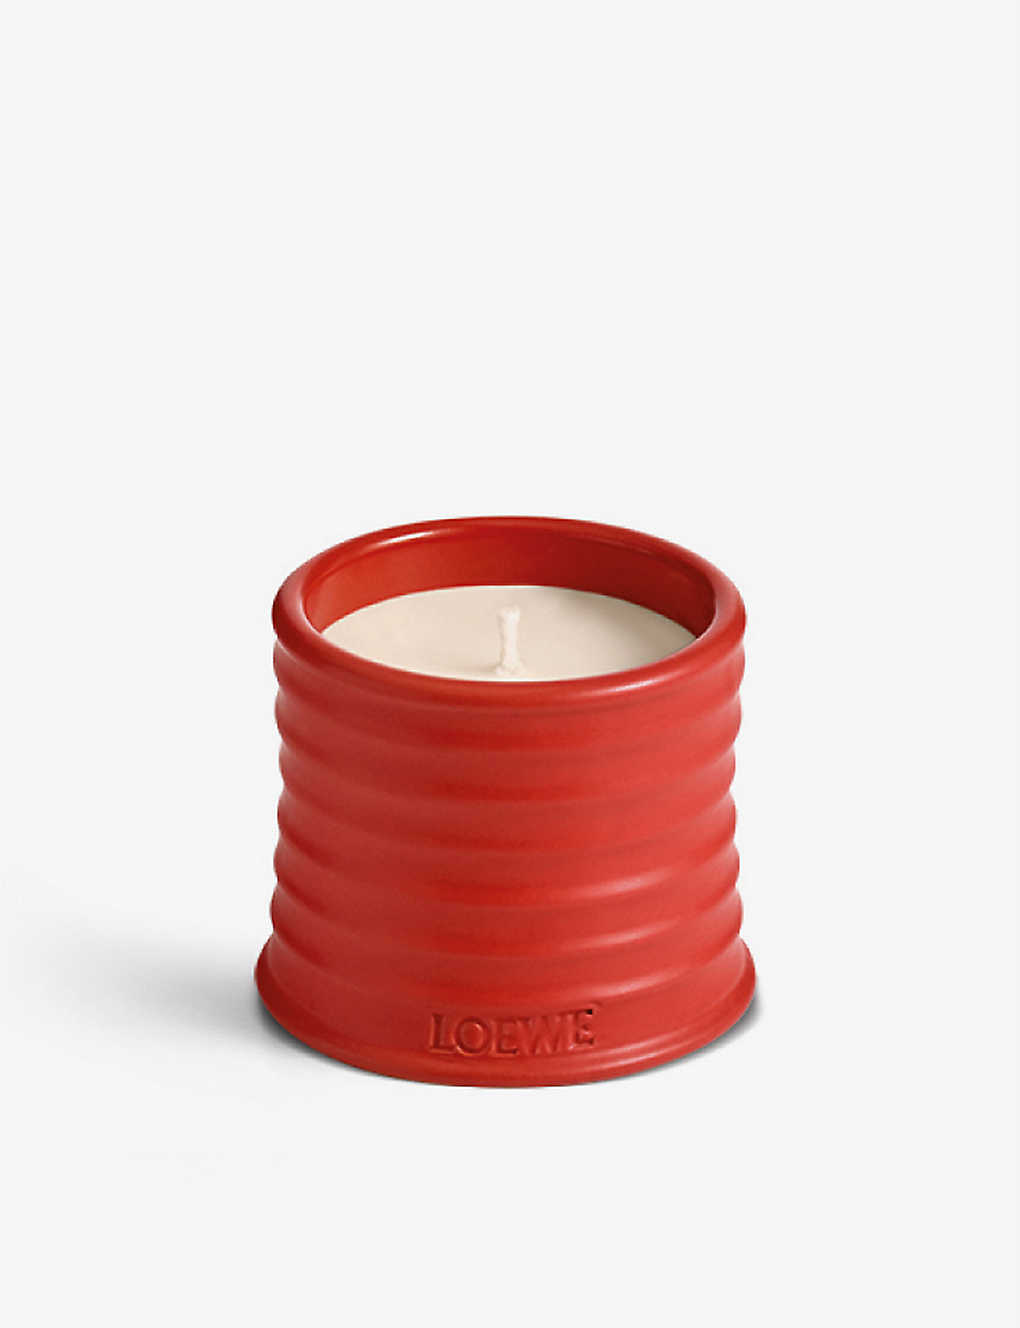 Loewe Tomato Leaves Scented Candle